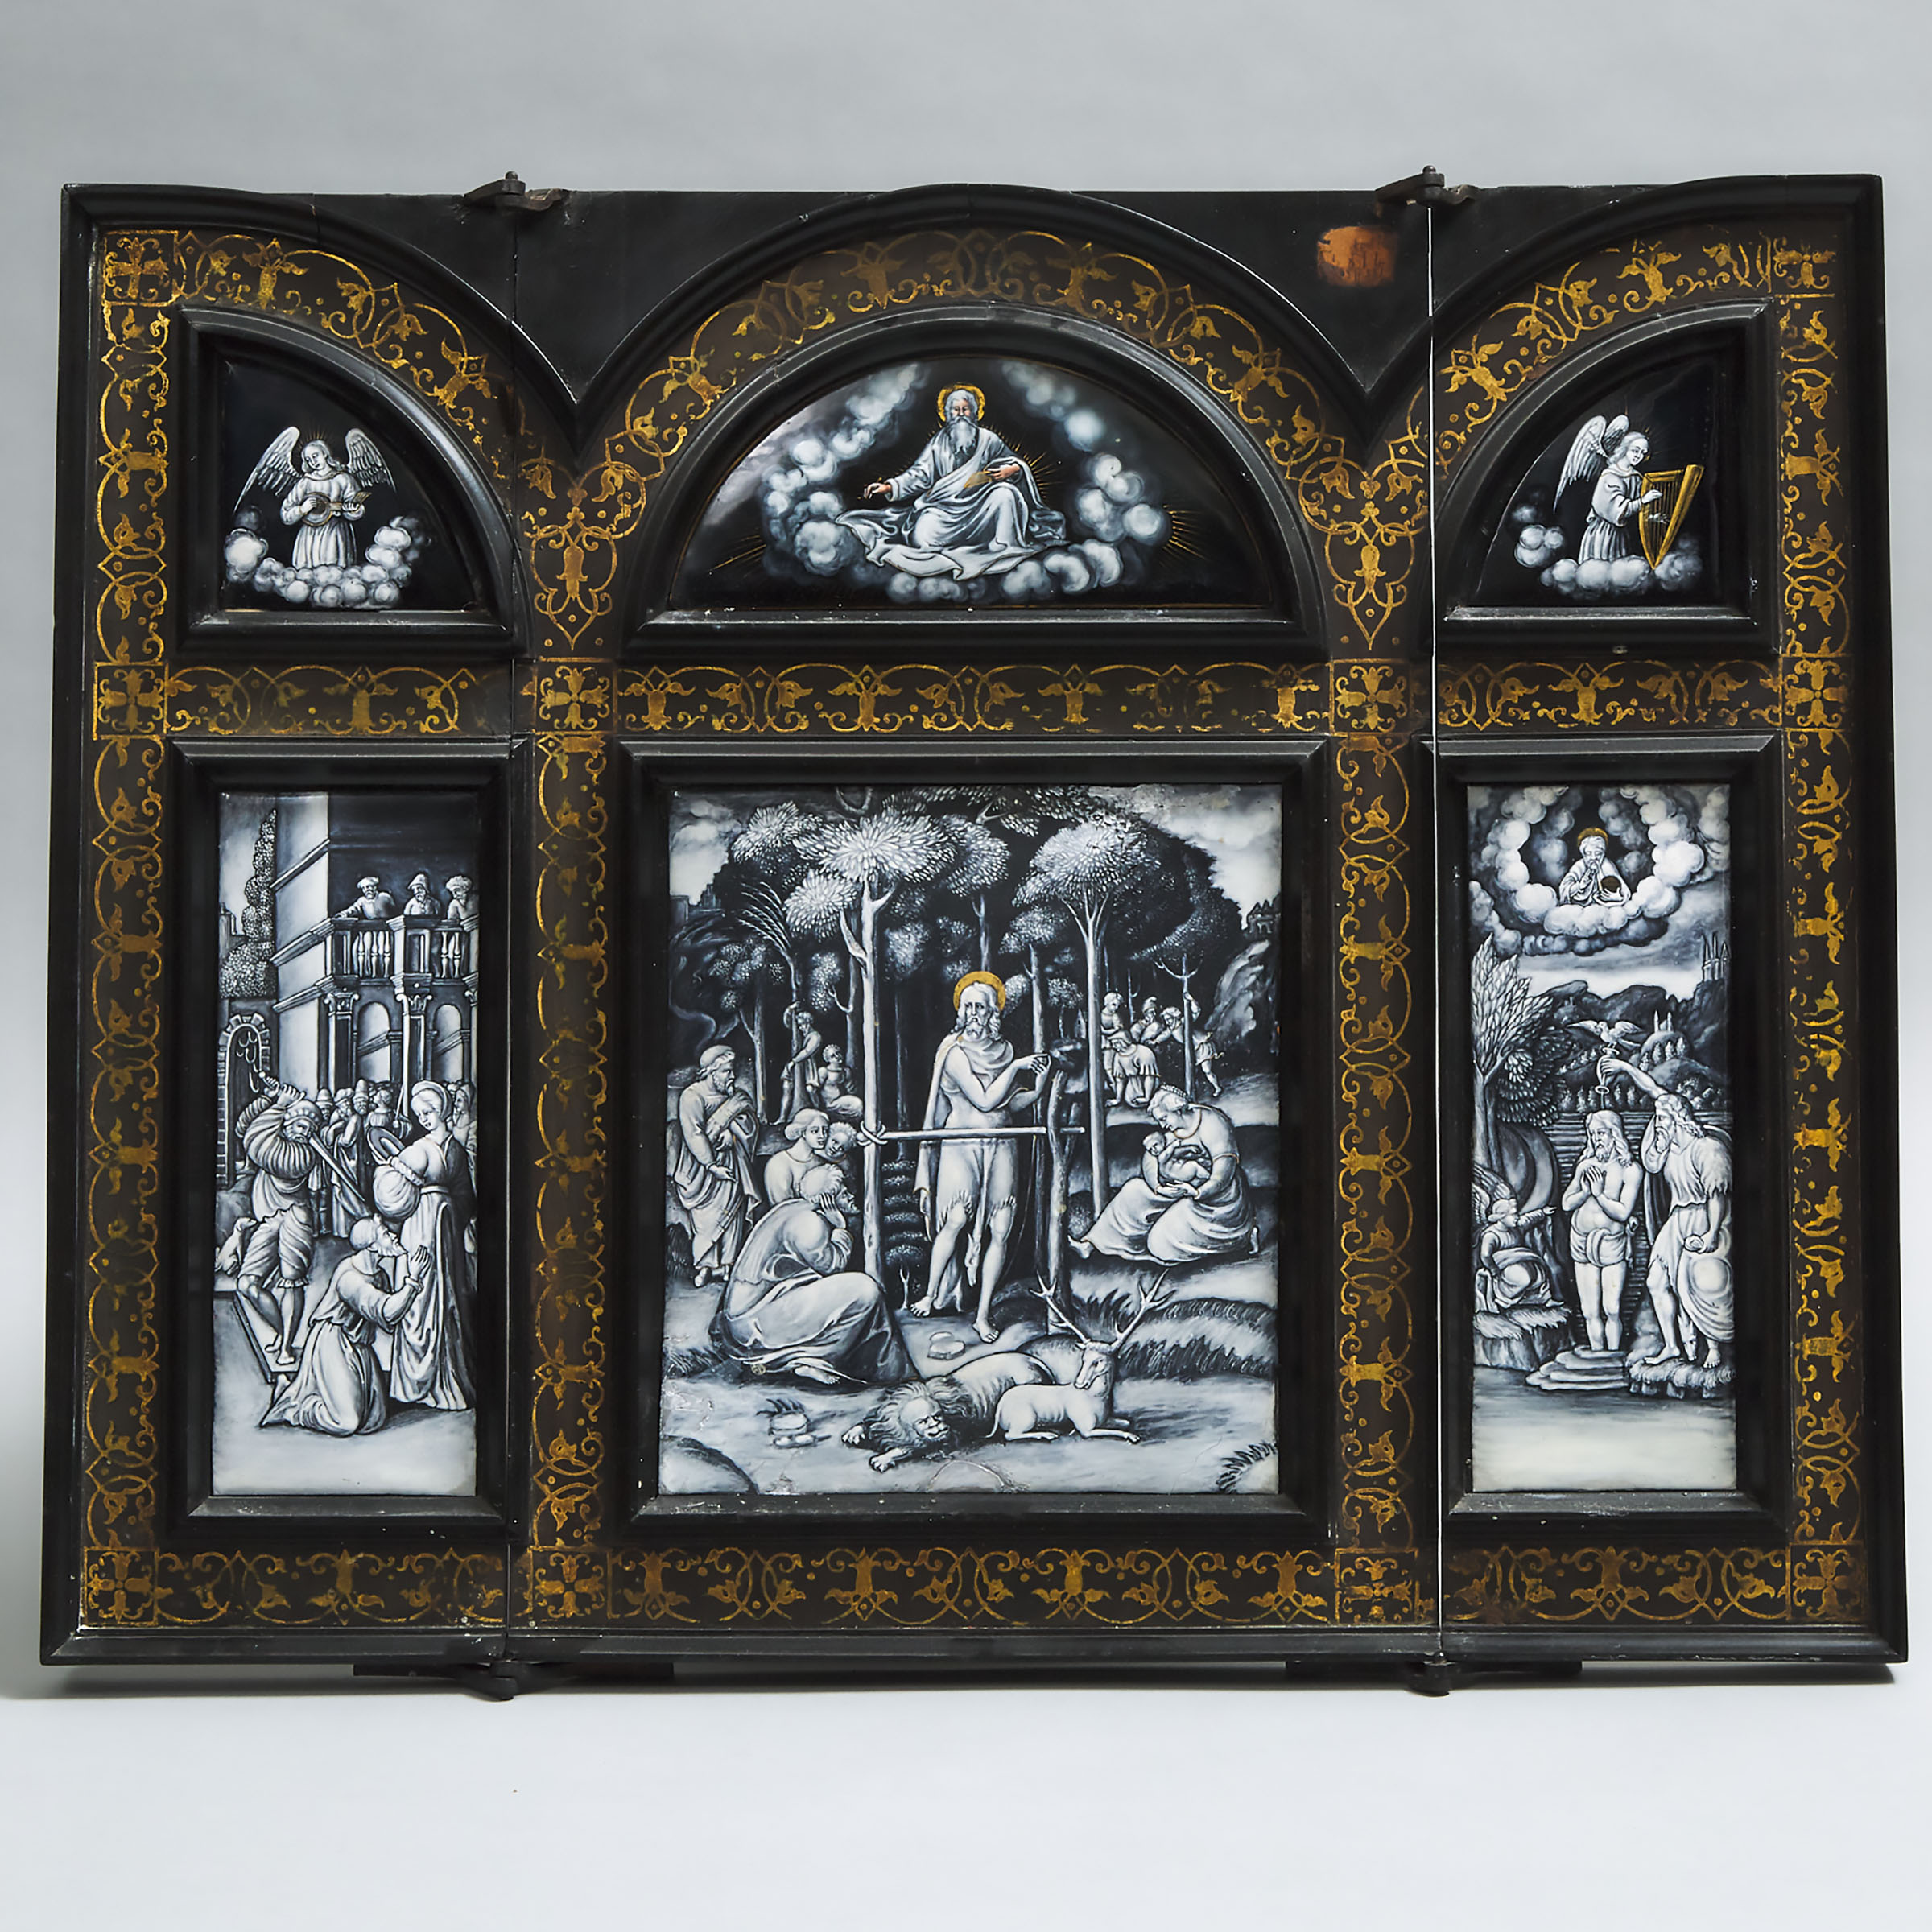 Large 16th century Style Limoges Enamel Triptych Panel Depicting Scenes from the LIfe of John the Baptist, 19th century